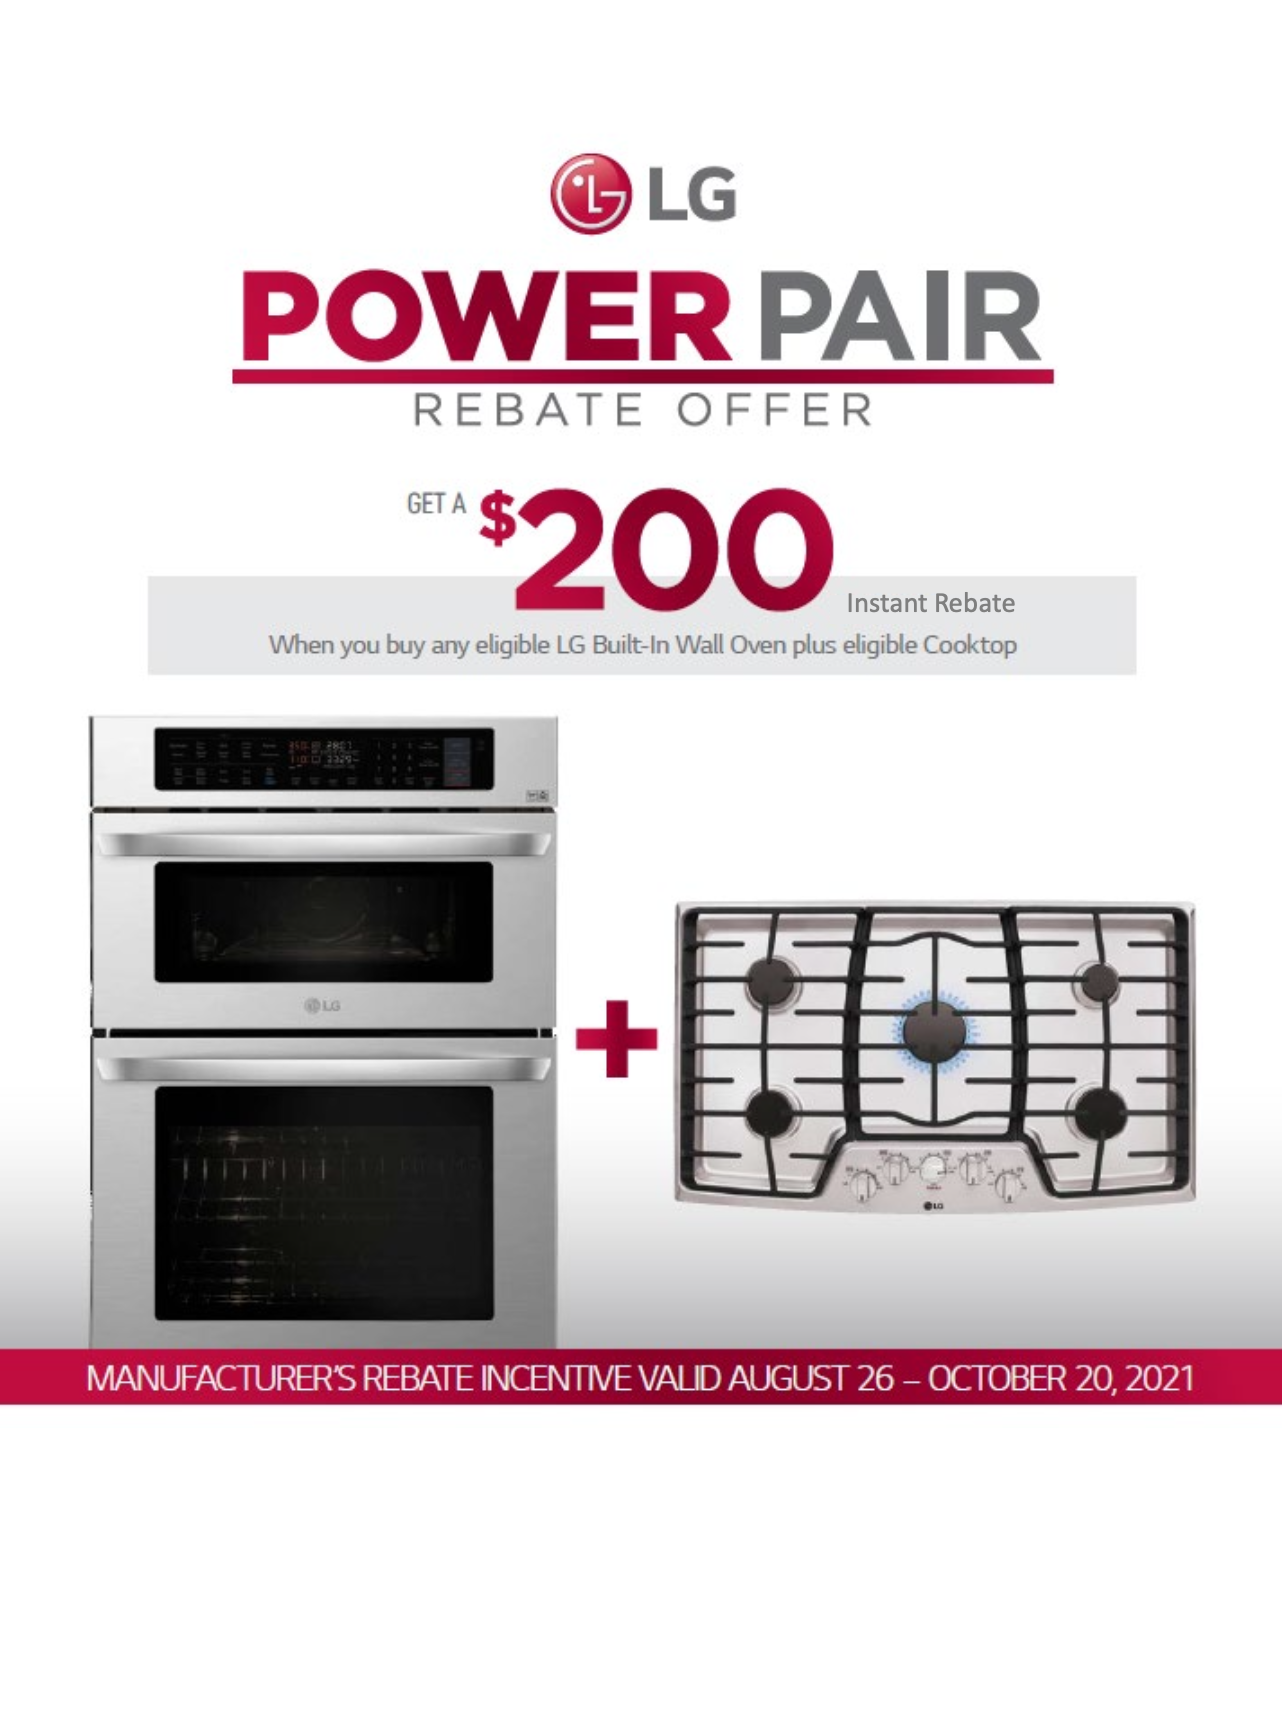 Home Depot $200 Rebate for LG Products